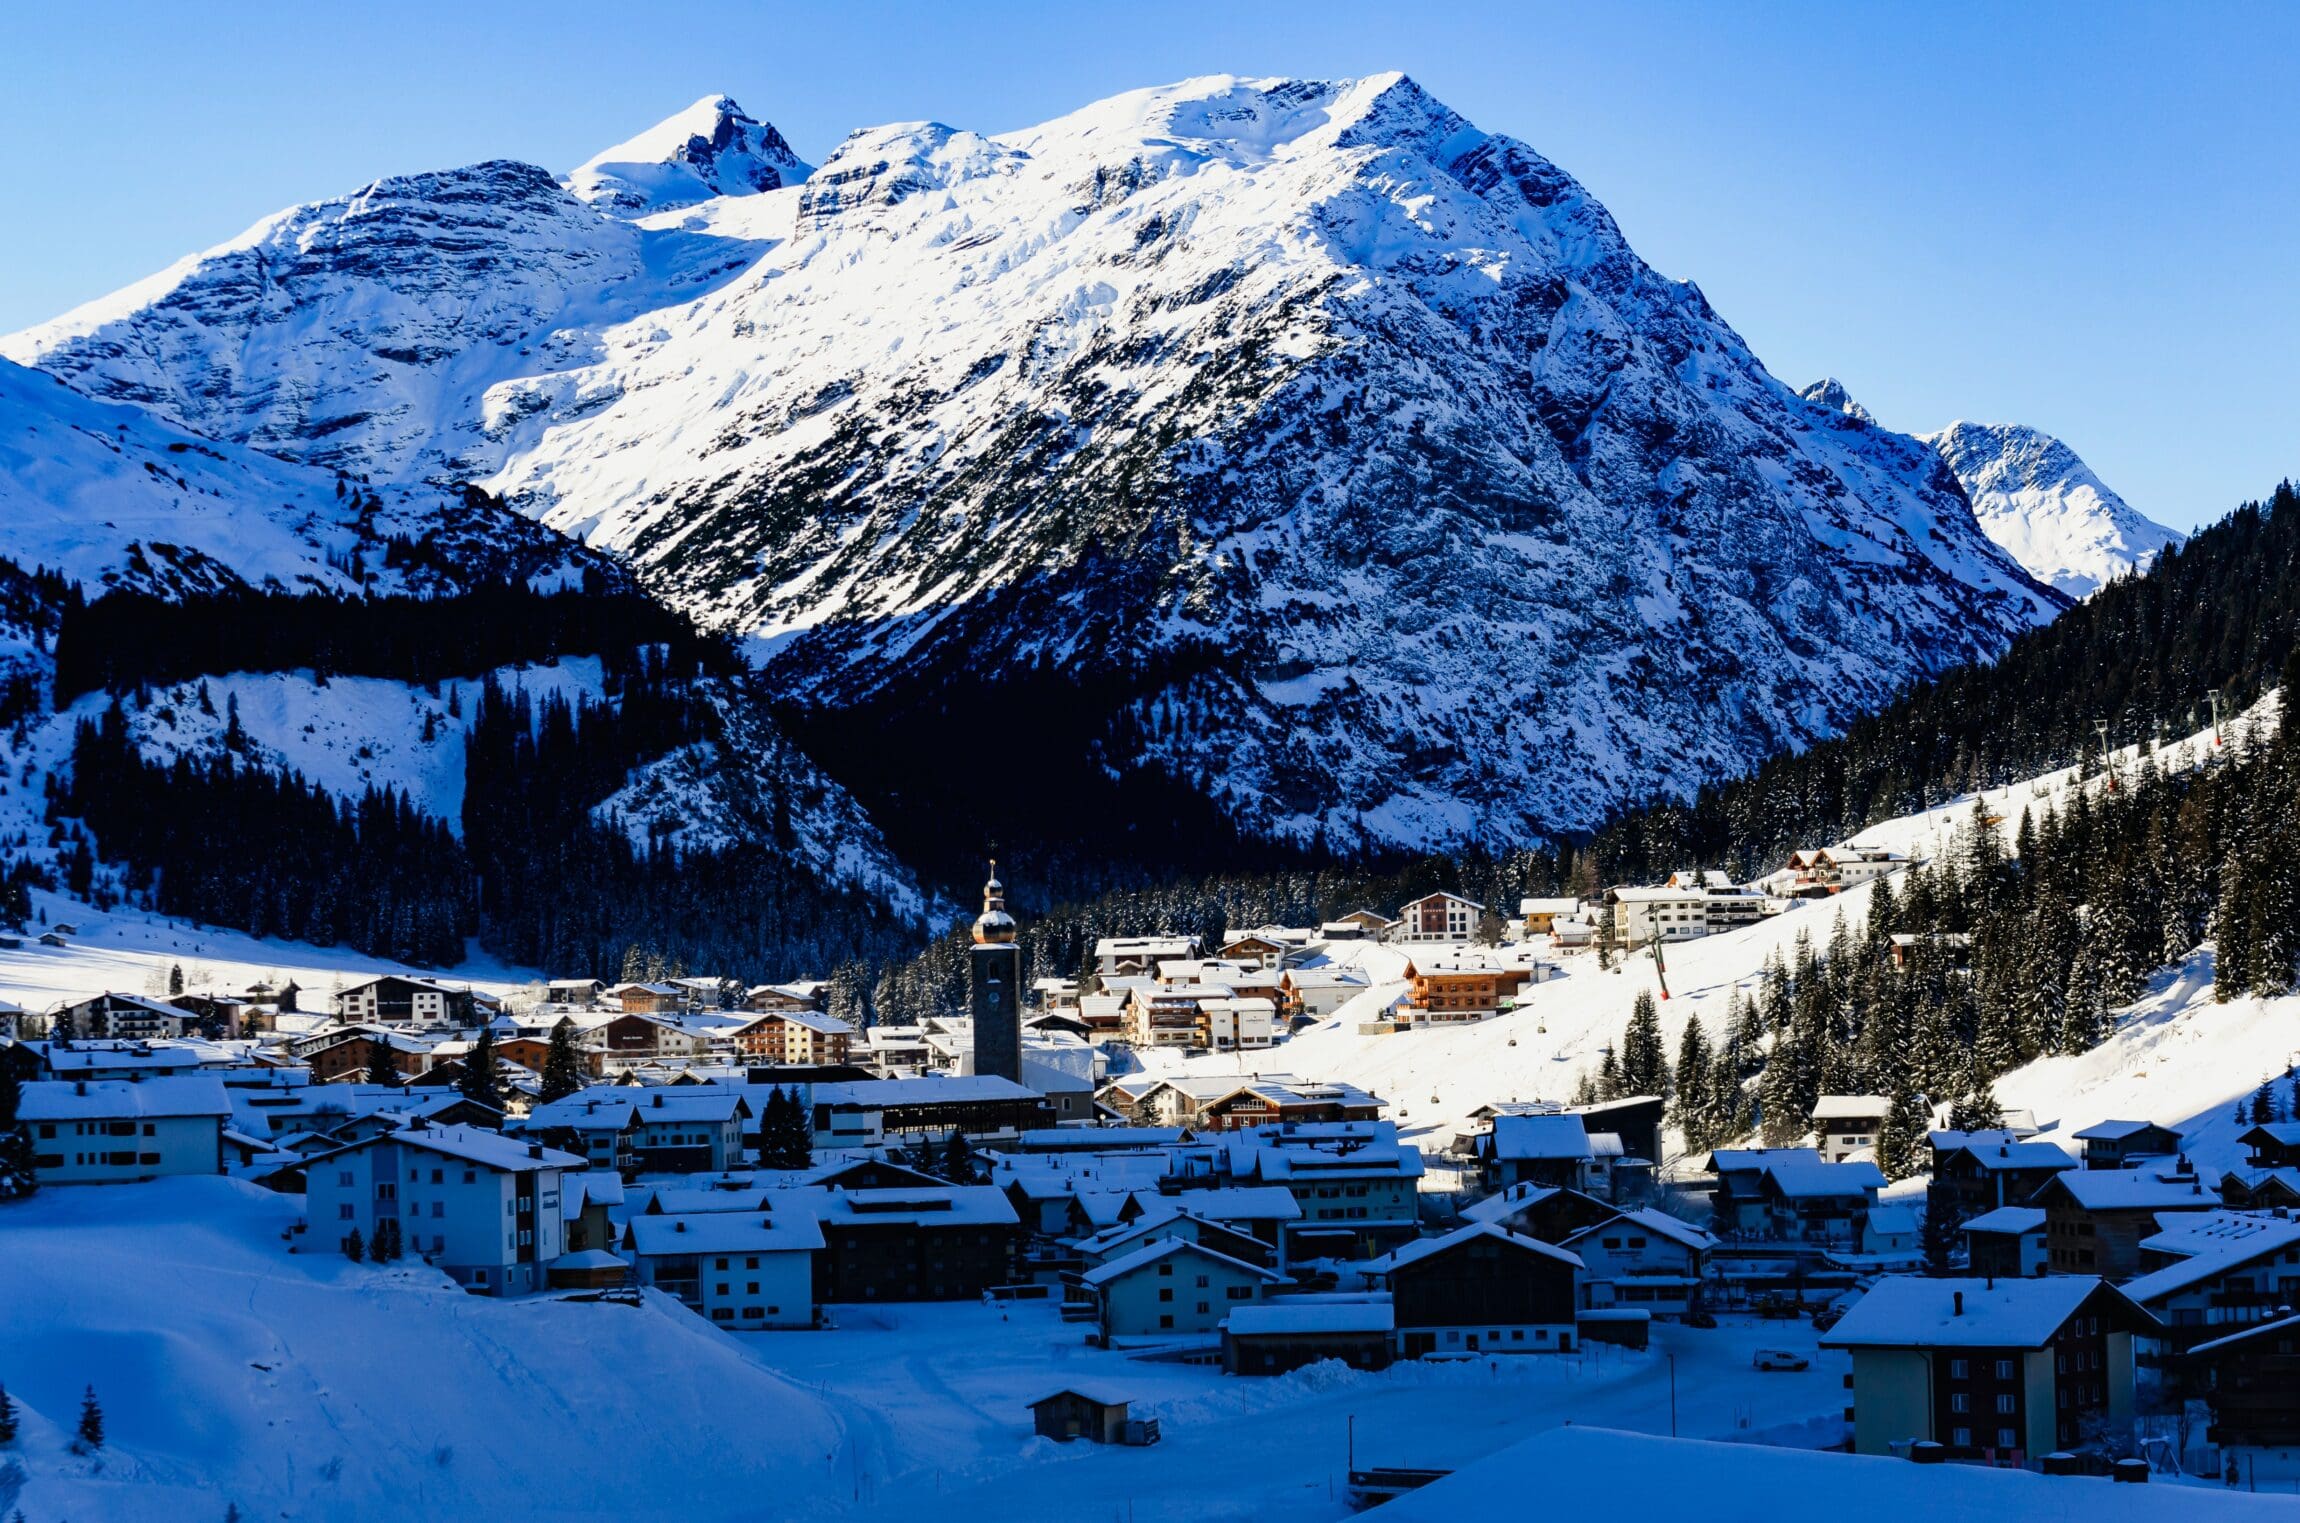 A view of the village of Lech in a small snowy valley